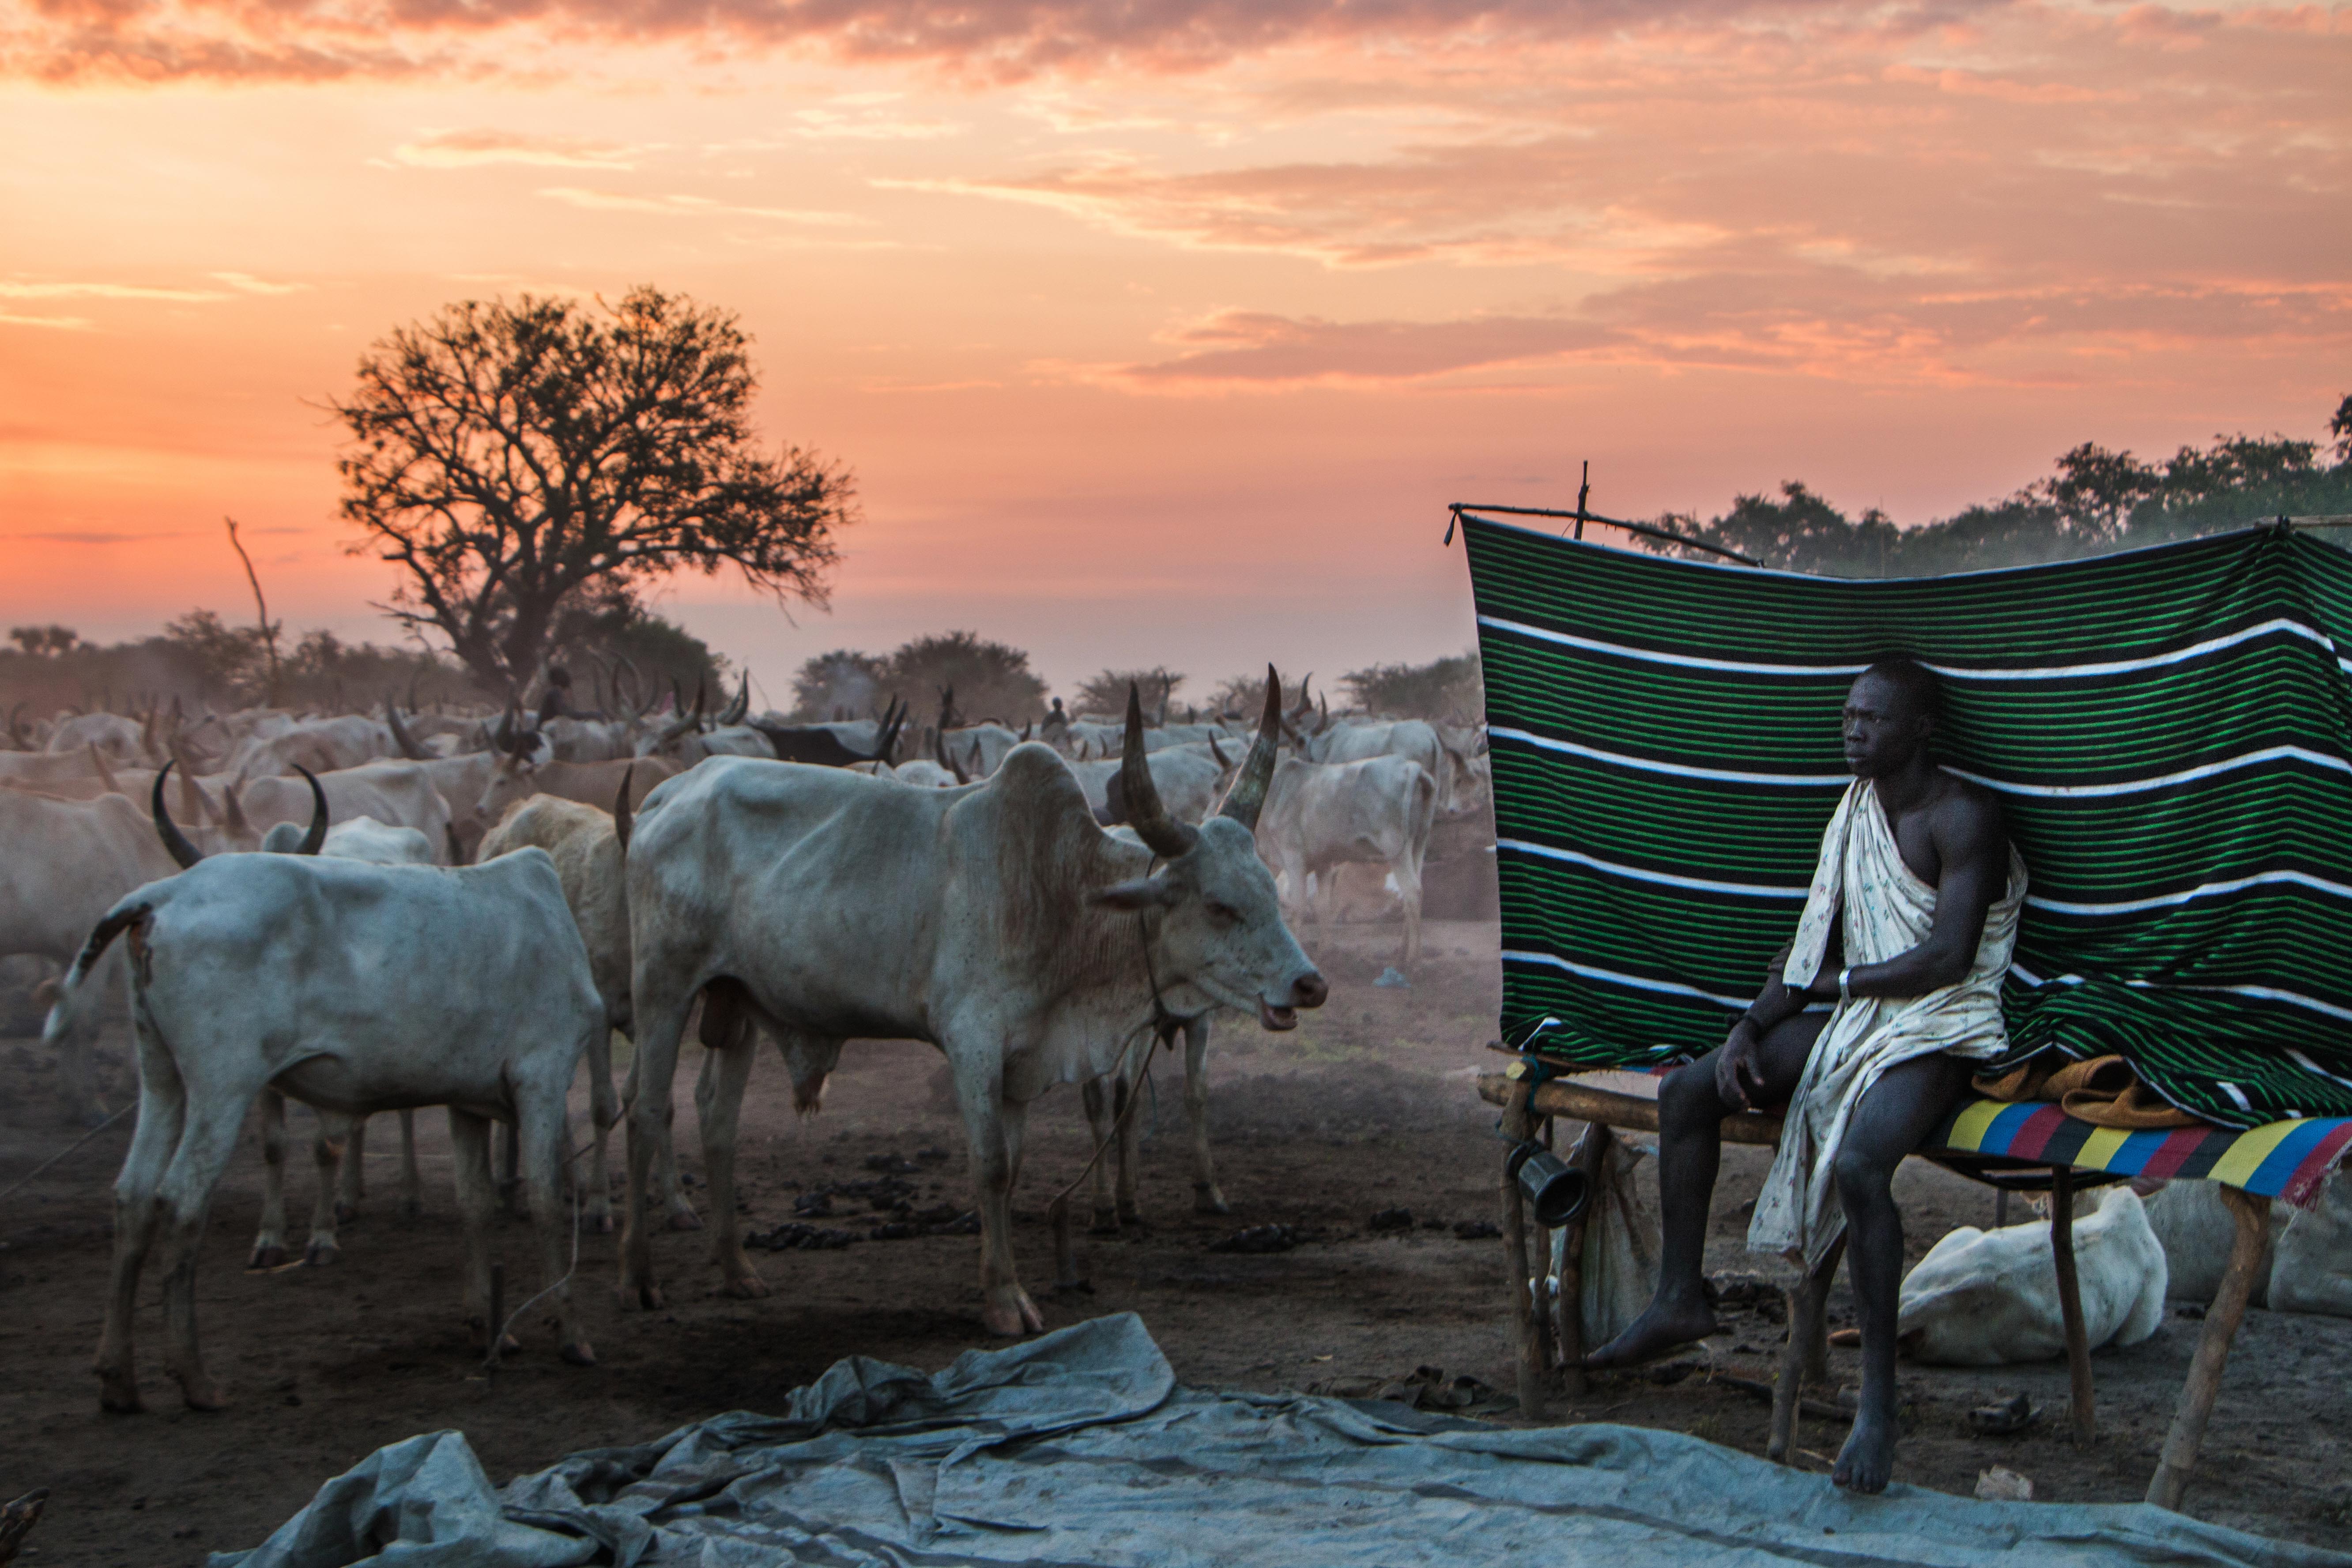 Mundari men spend the night with their cows to protect them from predators and cattle rustlers.